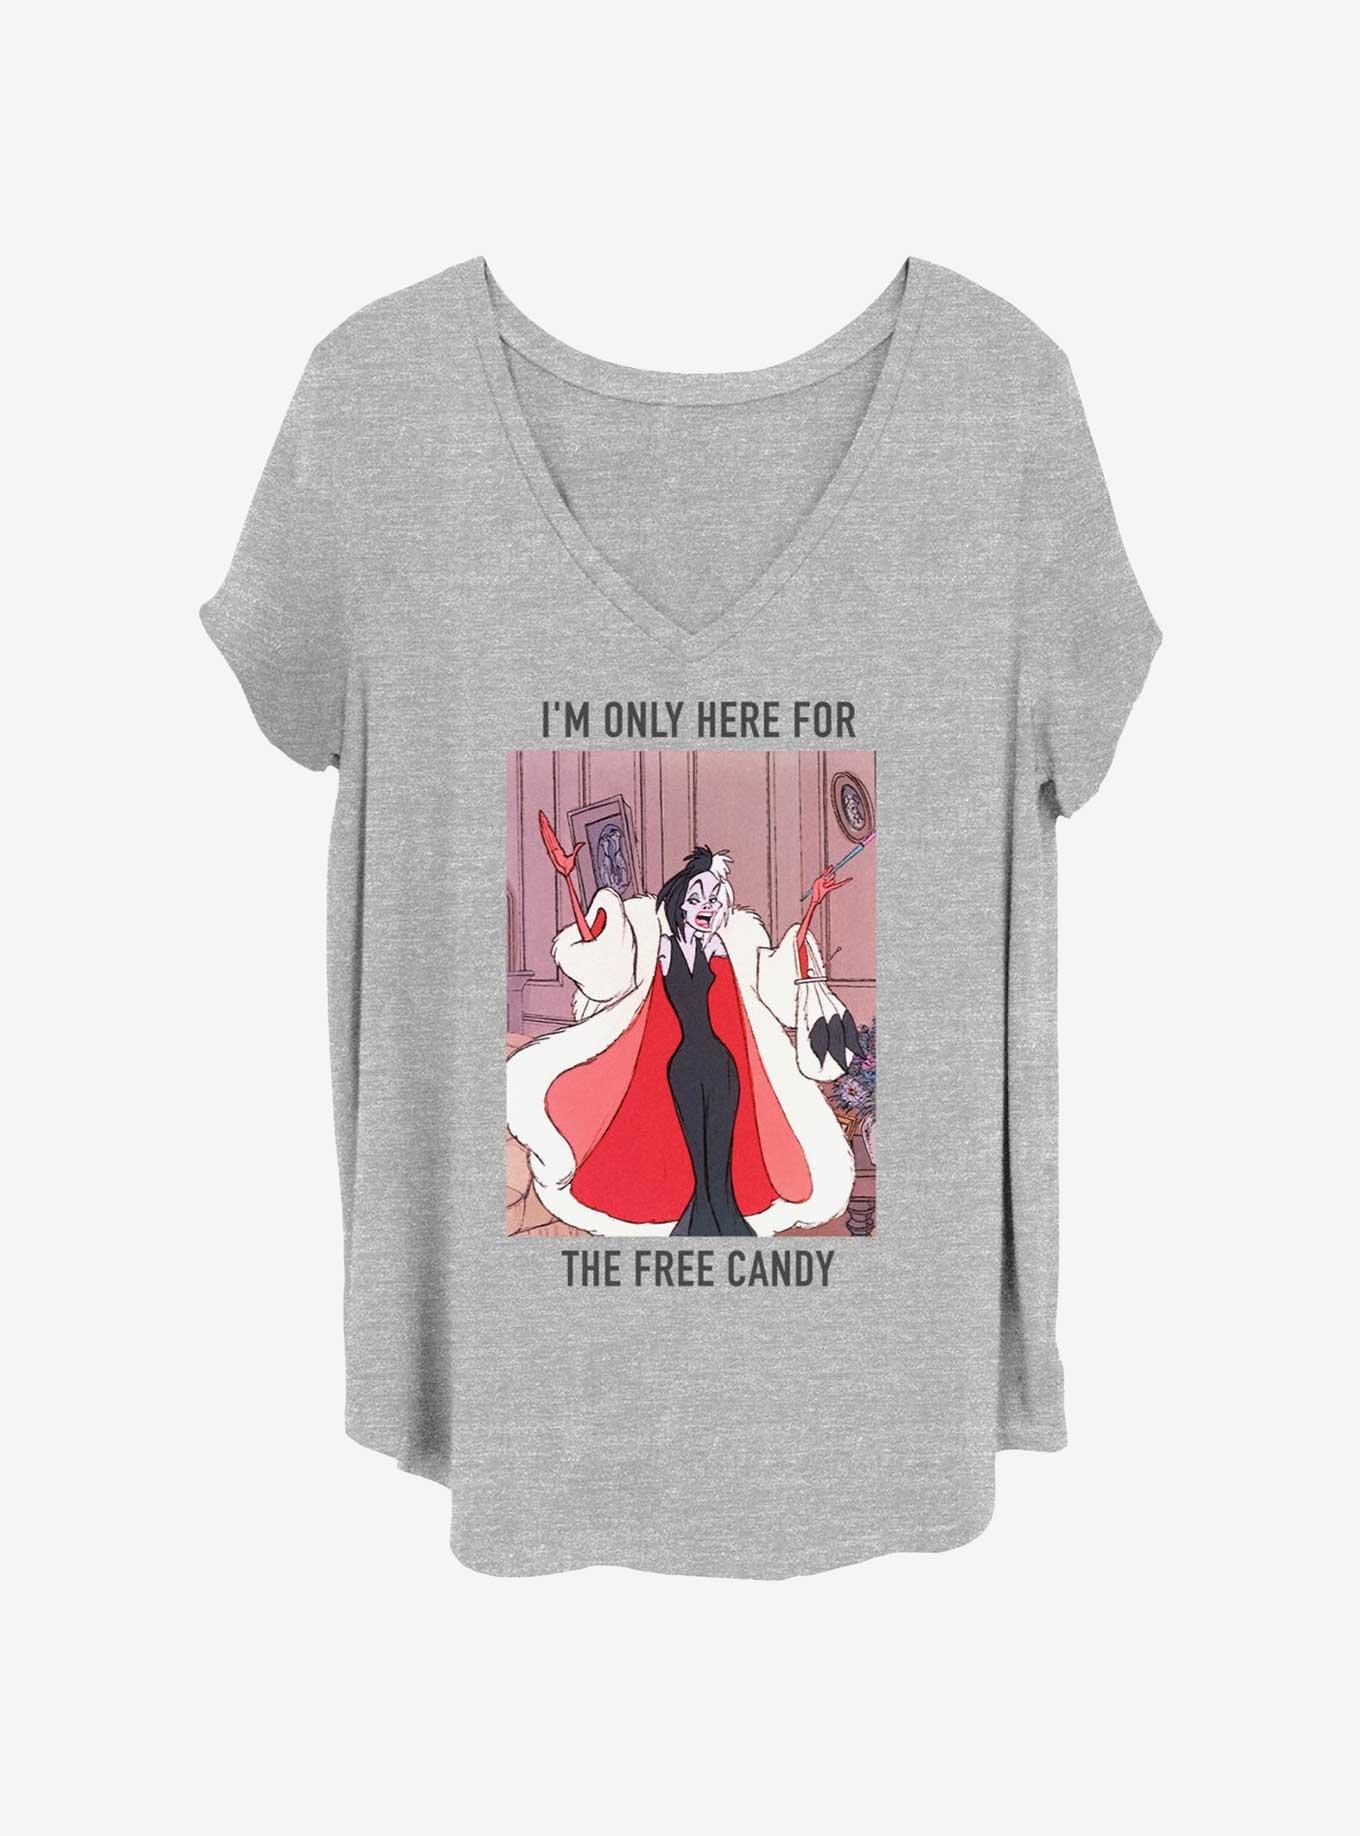 Disney 101 Dalmatians Cruella Only Here For Free Candy Girls T-Shirt Plus